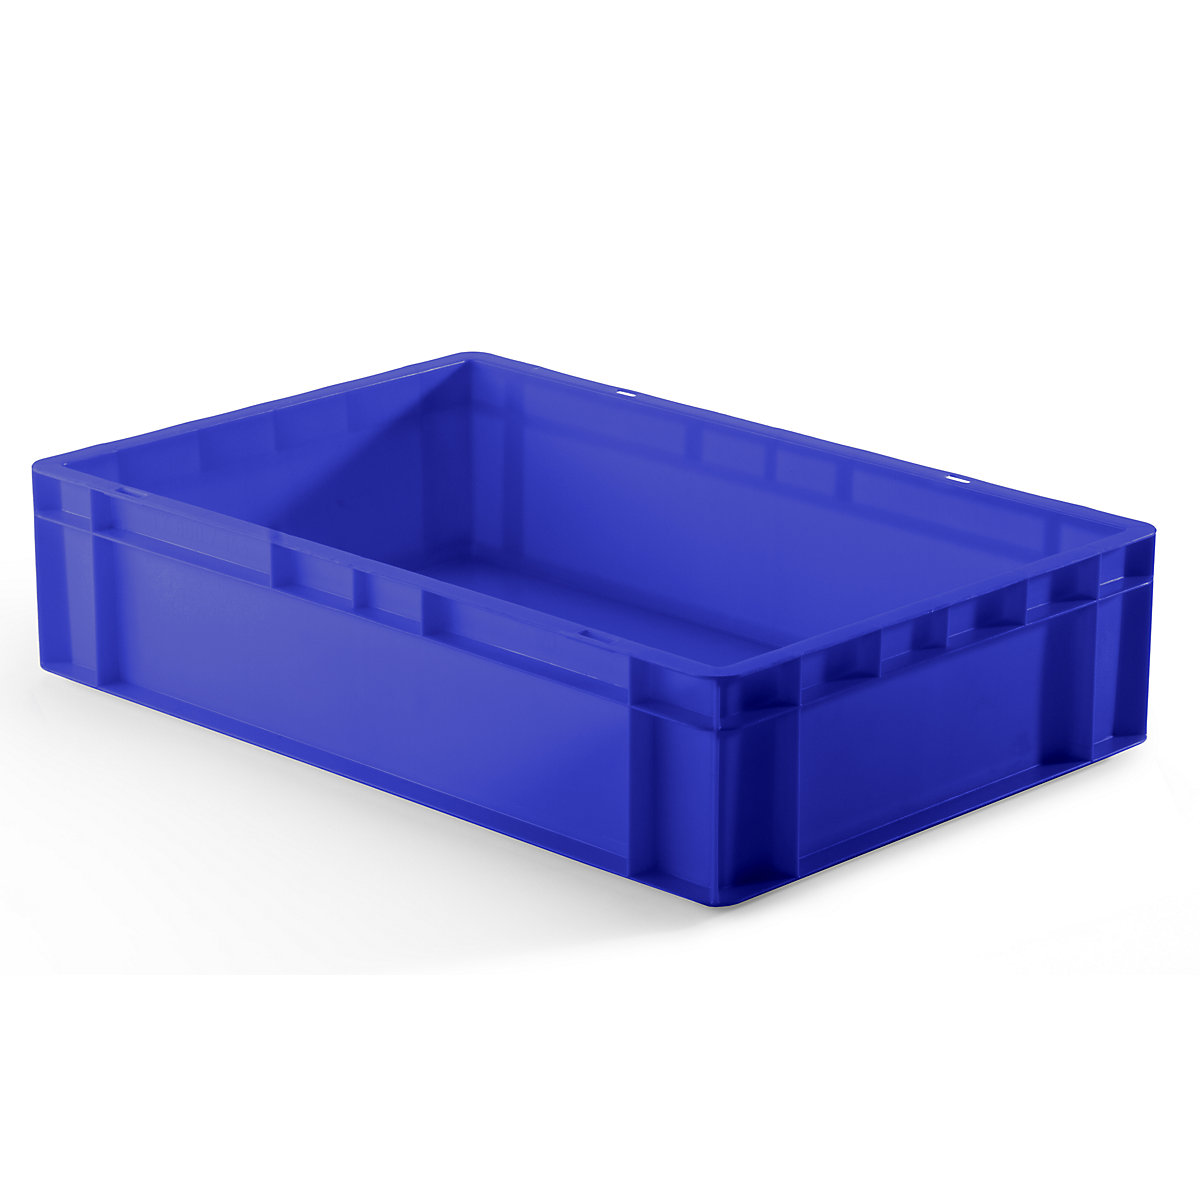 Euro stacking container, closed walls and base, LxWxH 600 x 400 x 145 mm, blue, pack of 5